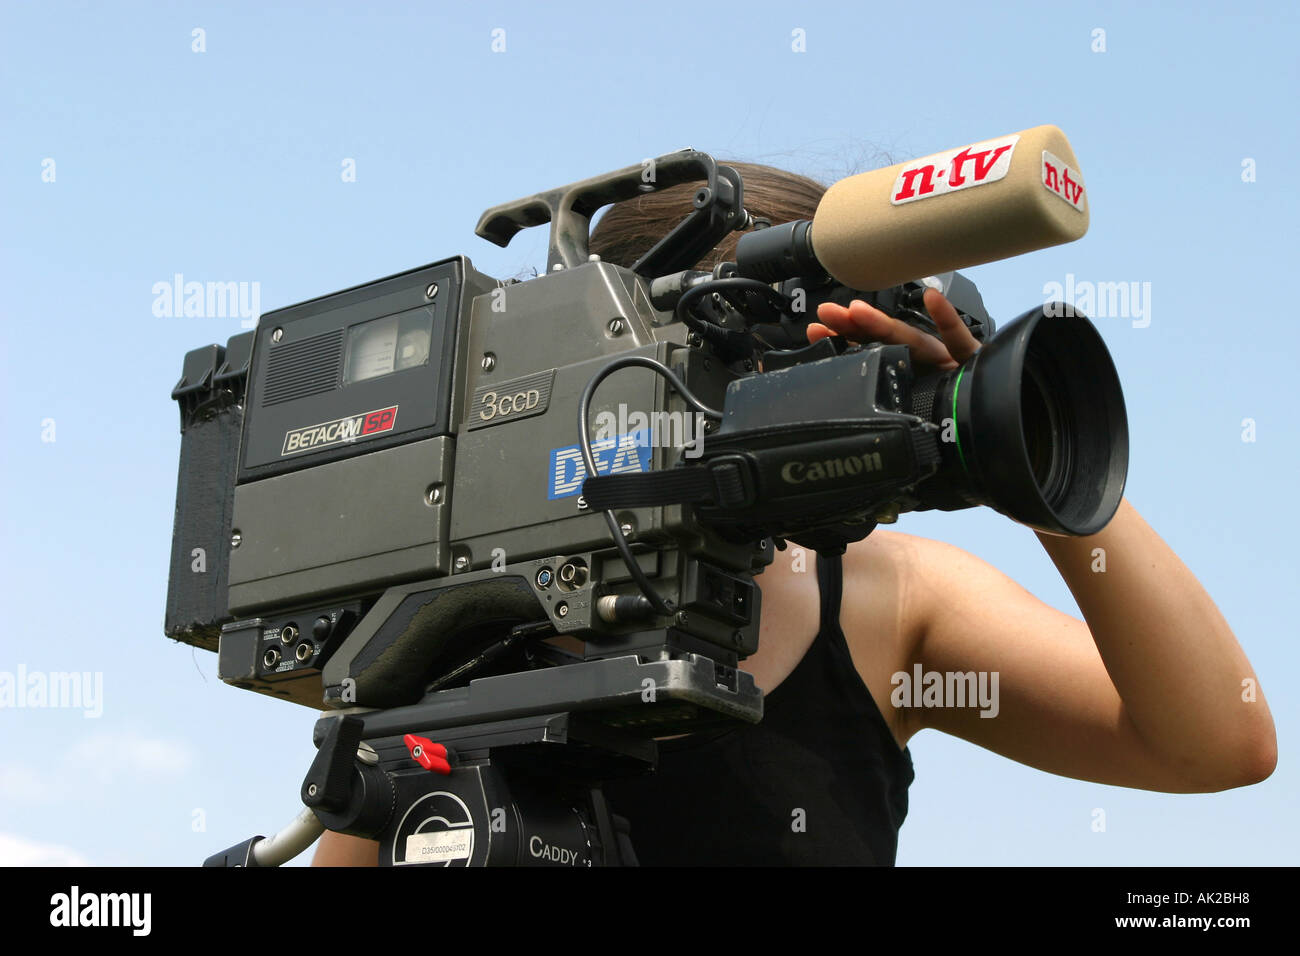 N-tv newchannel camerawomen with camera Stock Photo